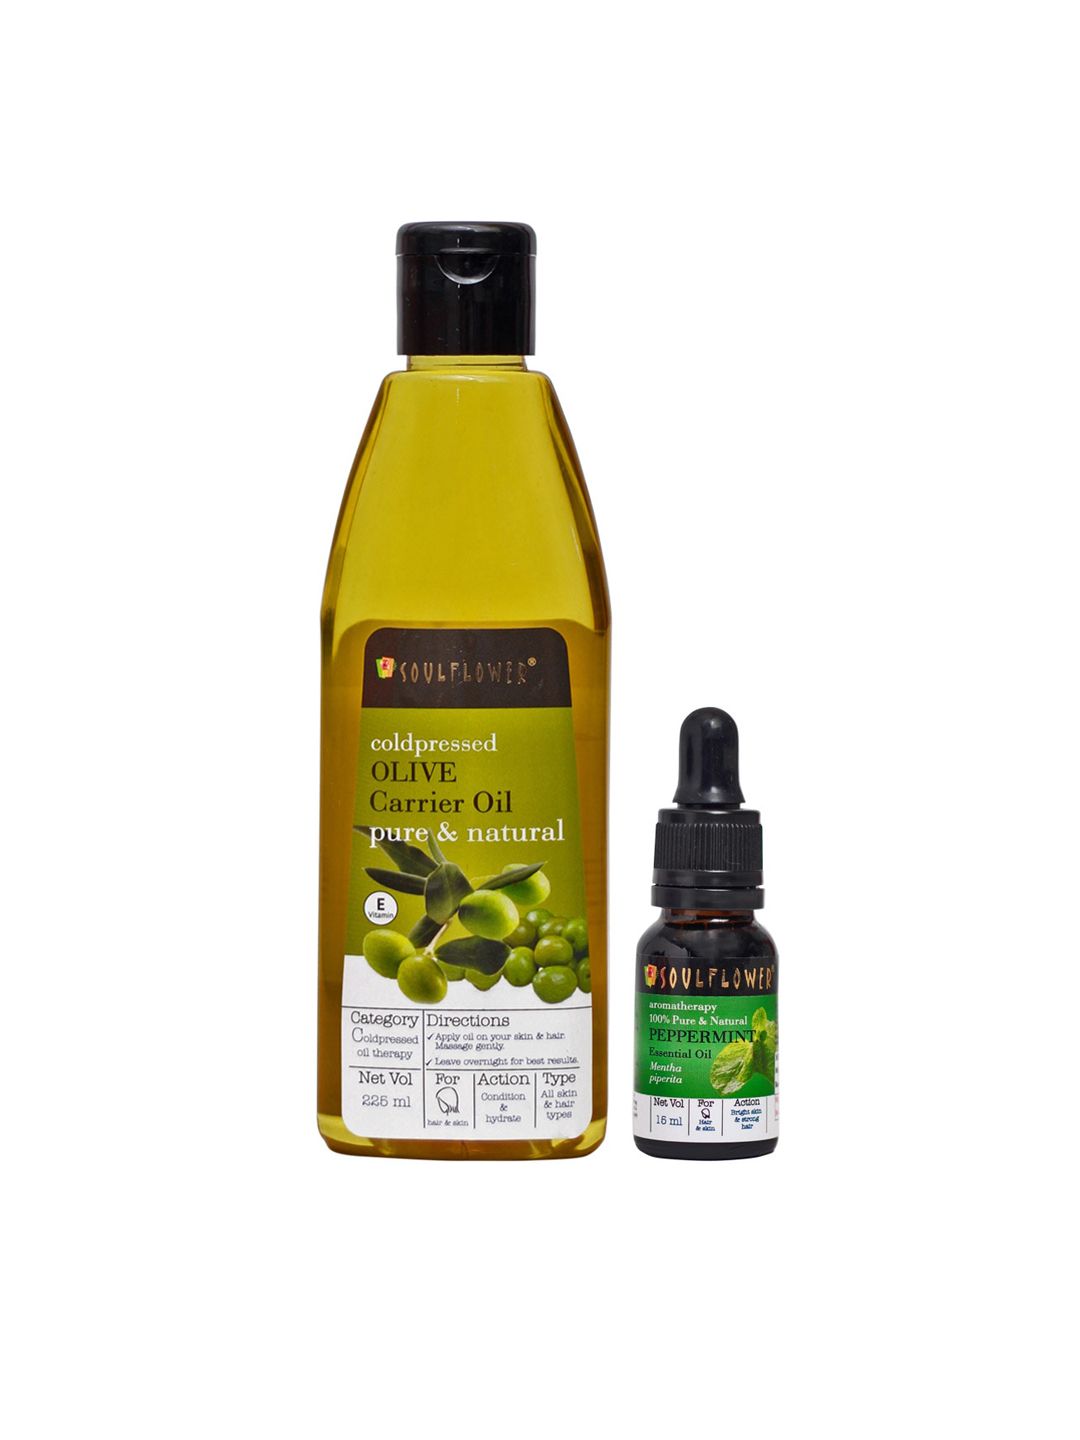 Soulflower Unisex Transparent Olive Oil & Peppermint Essential Oil 240 ml Price in India